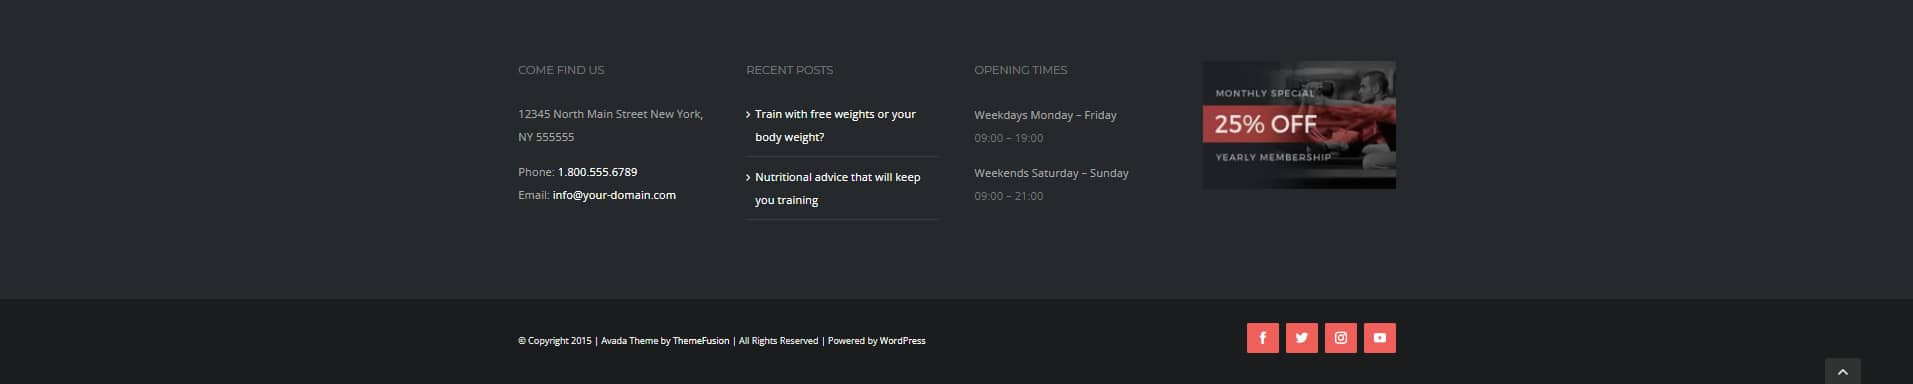 Avada Gym Footer